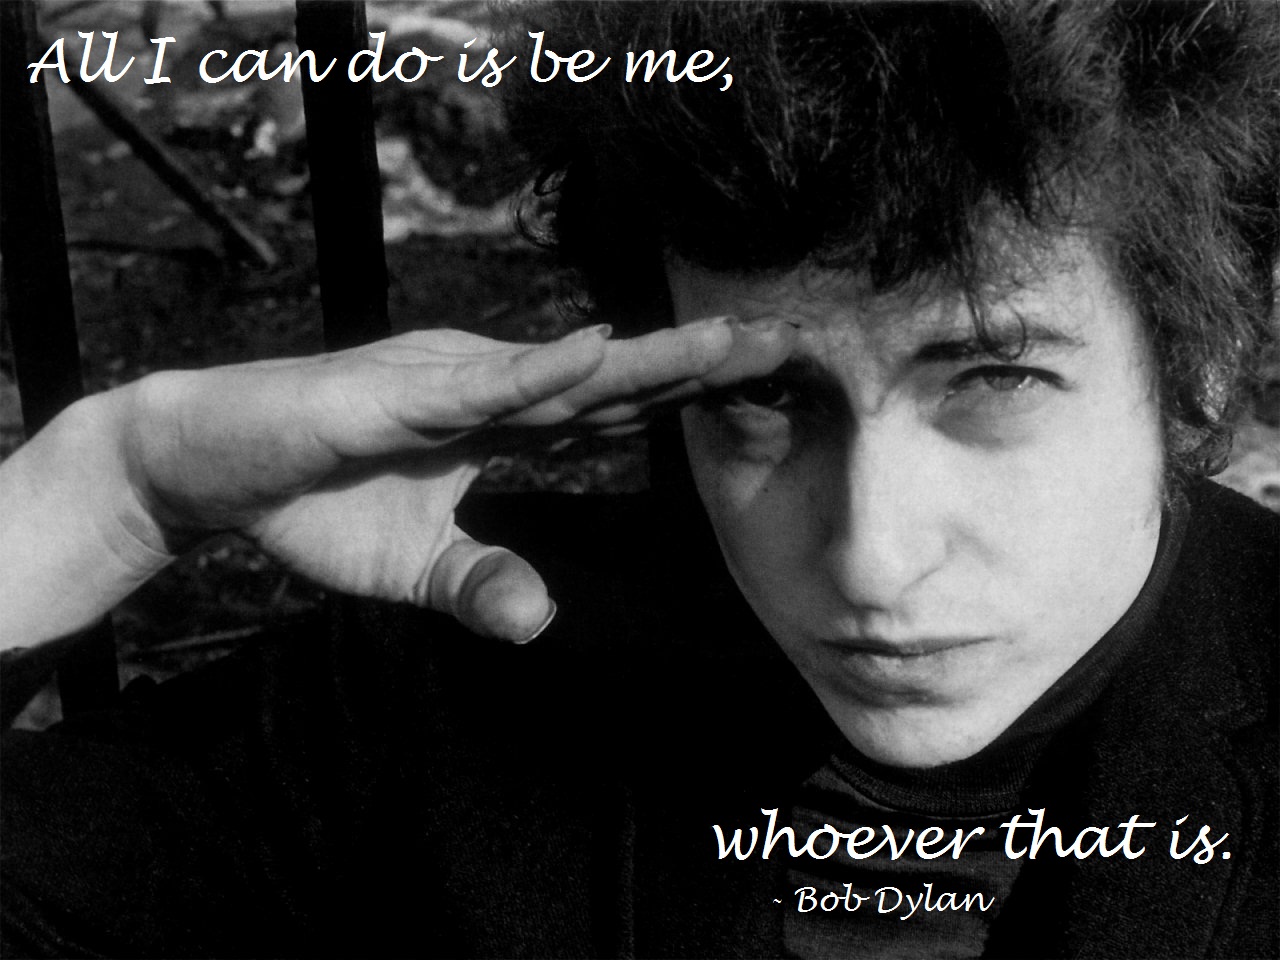 Bob Dylan quote #1